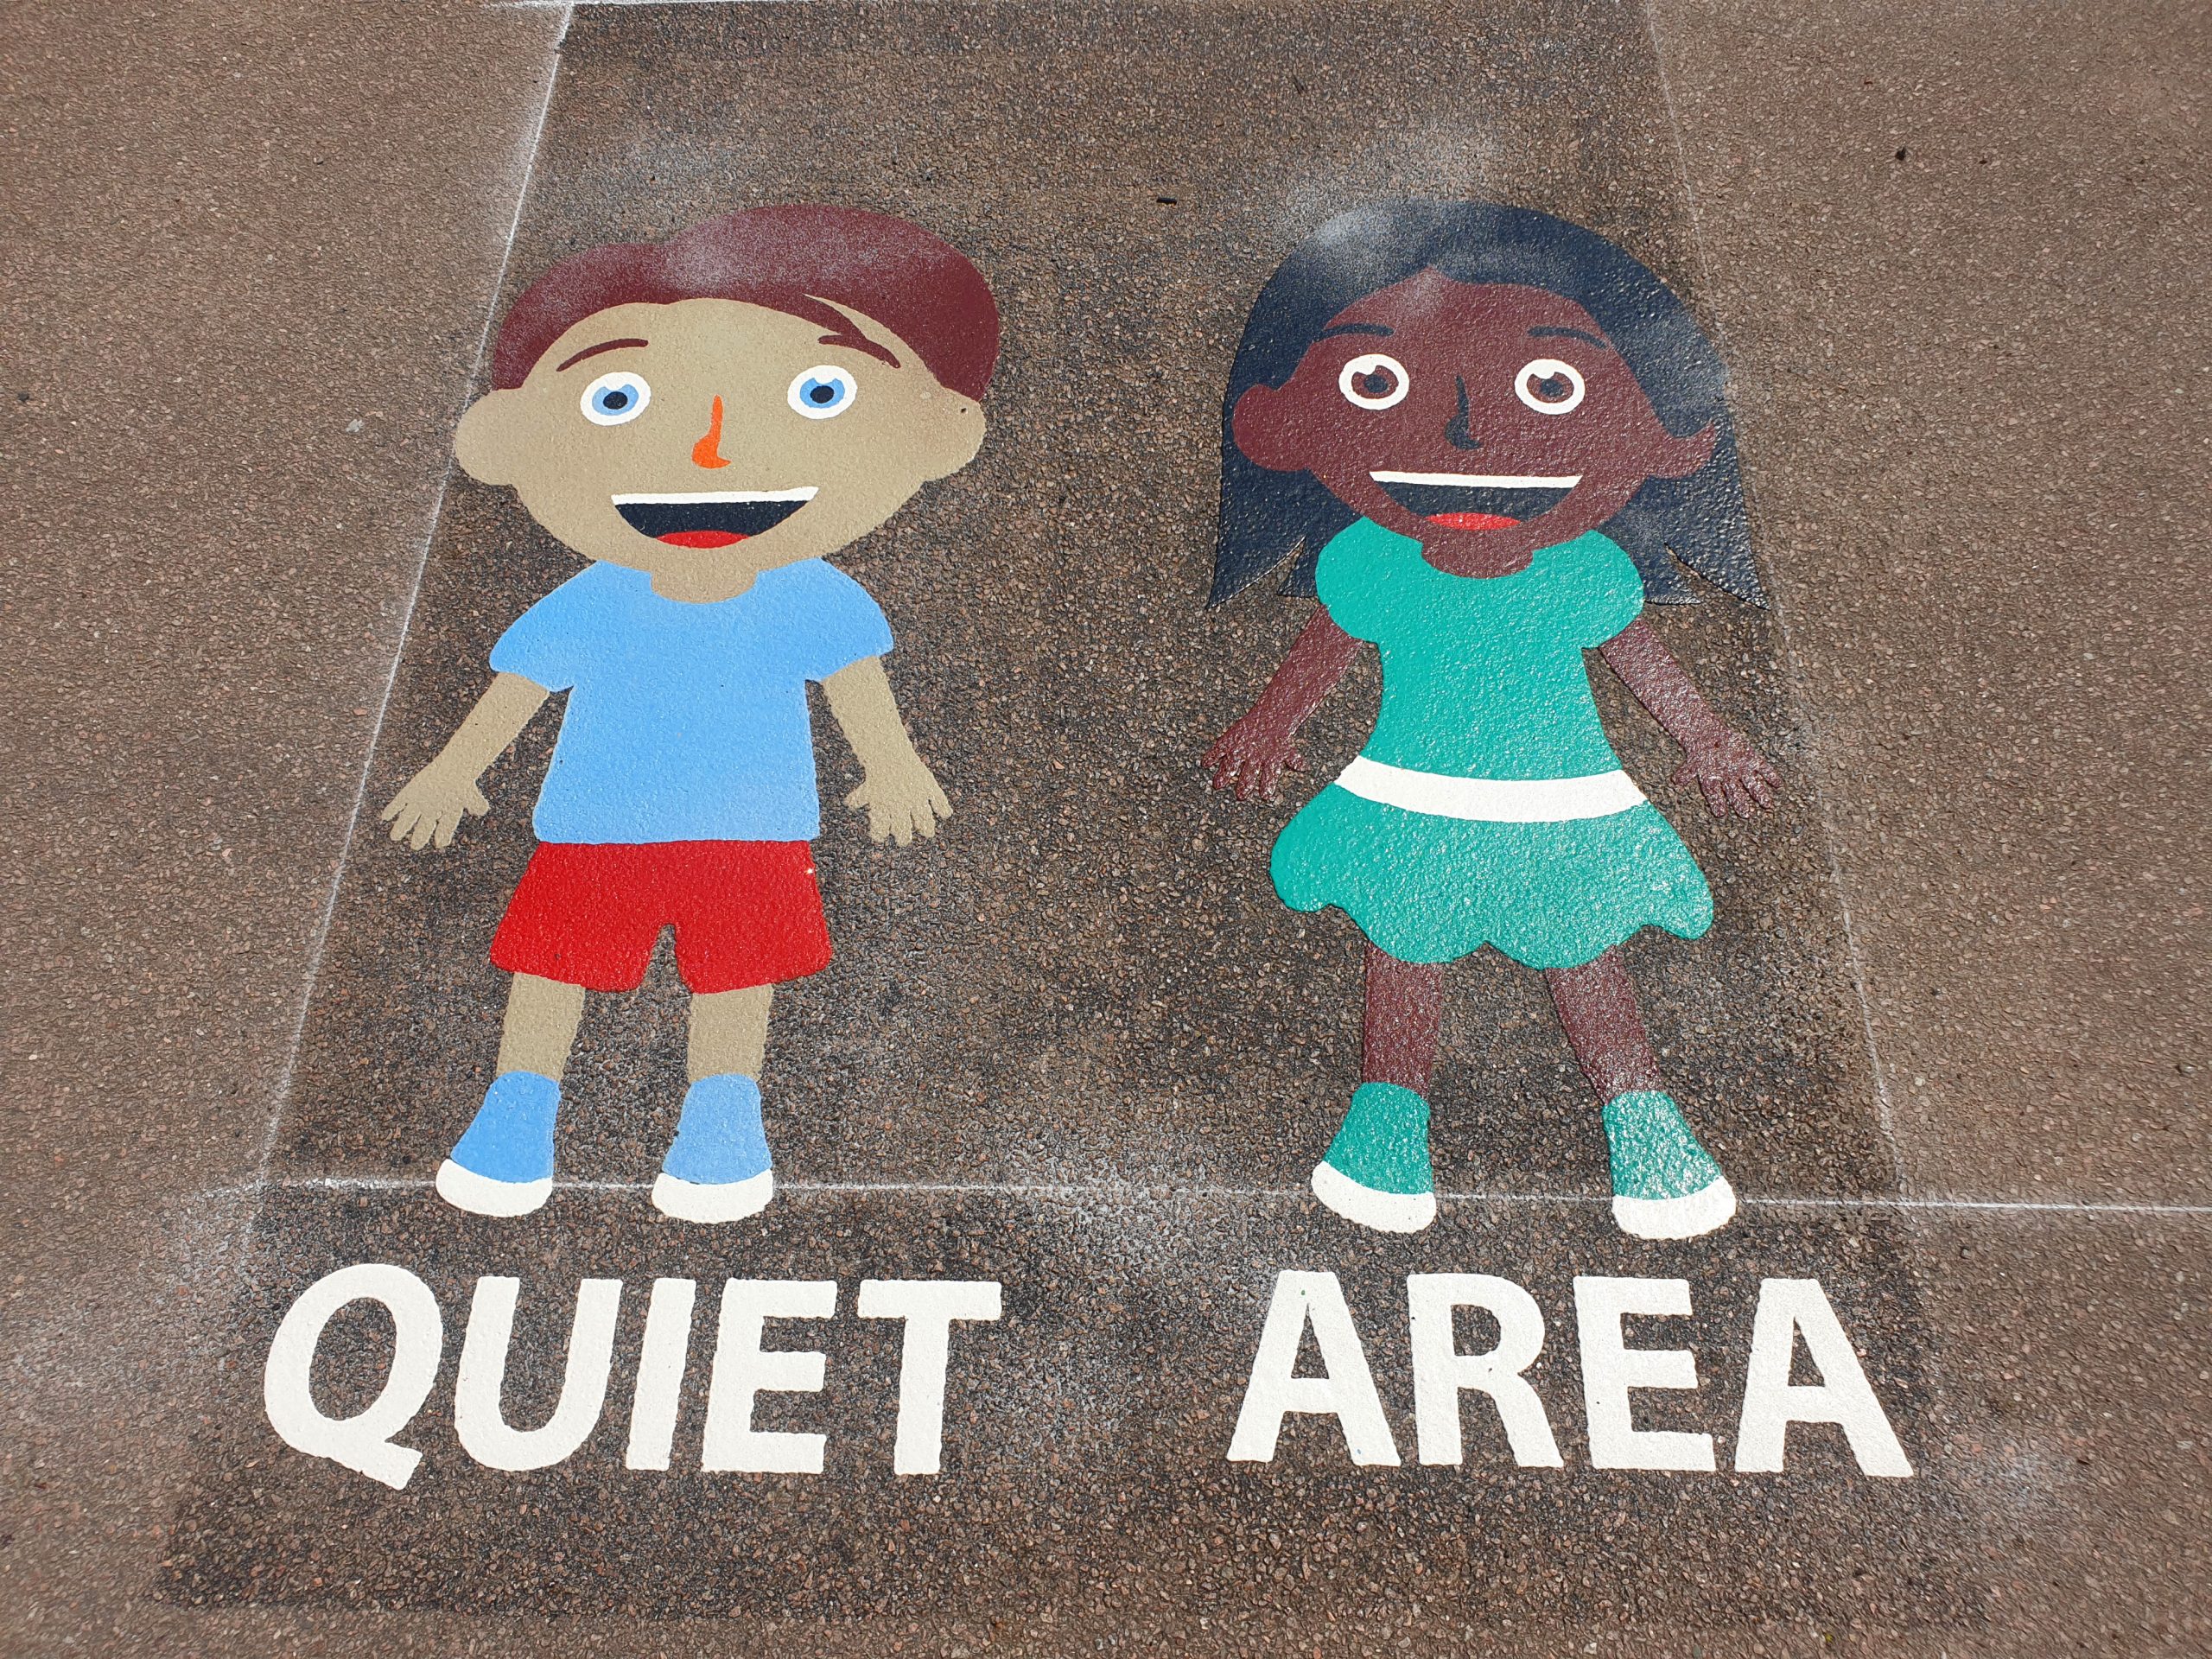 Using Playground Markings to Help Pupils Learn Group Play and Social Skills